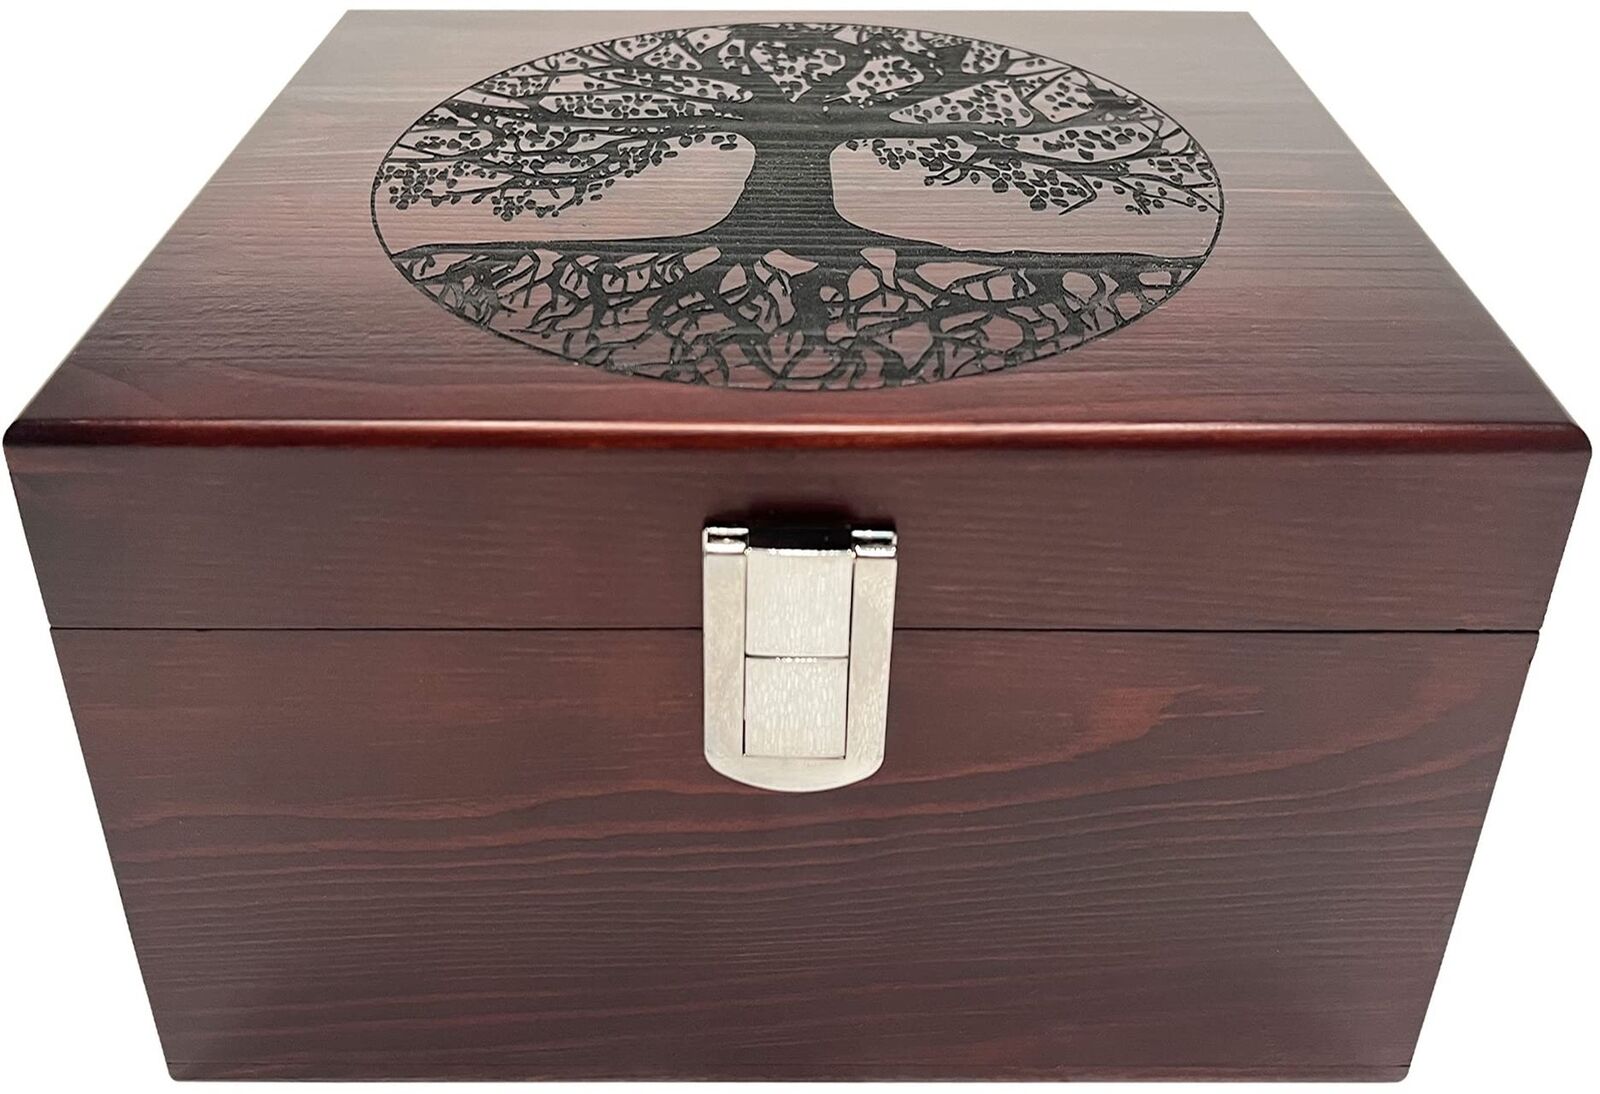 Tree of Life Large Wooden Decorative Box - Etched Wooden Keepsake Boxes for Home